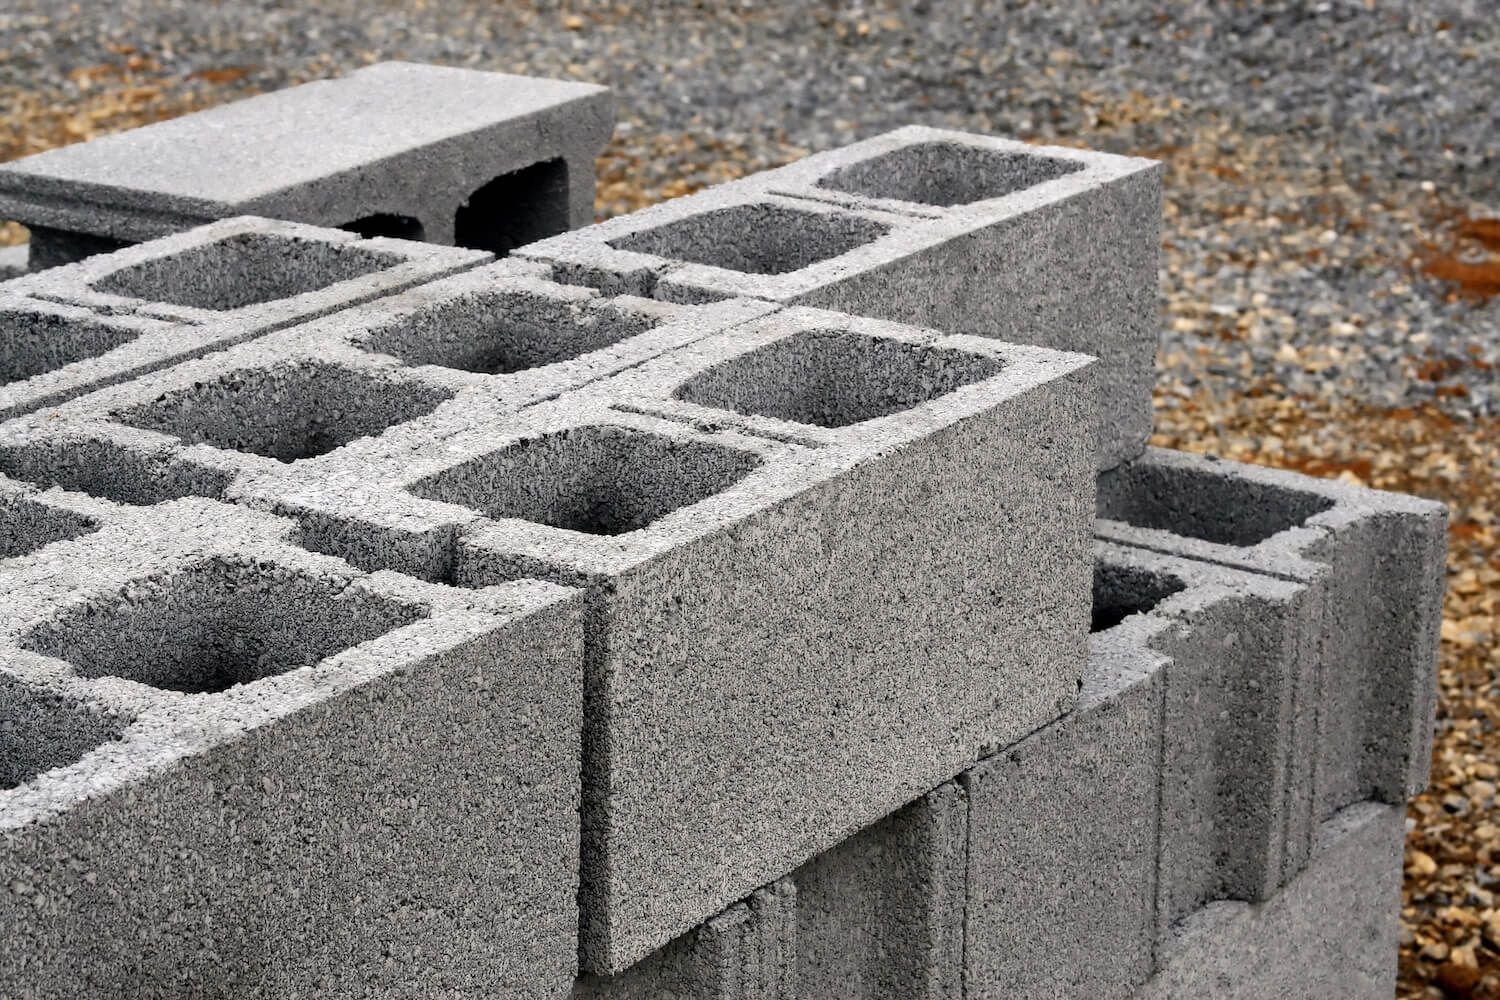 Concrete Blocks stacked in yard